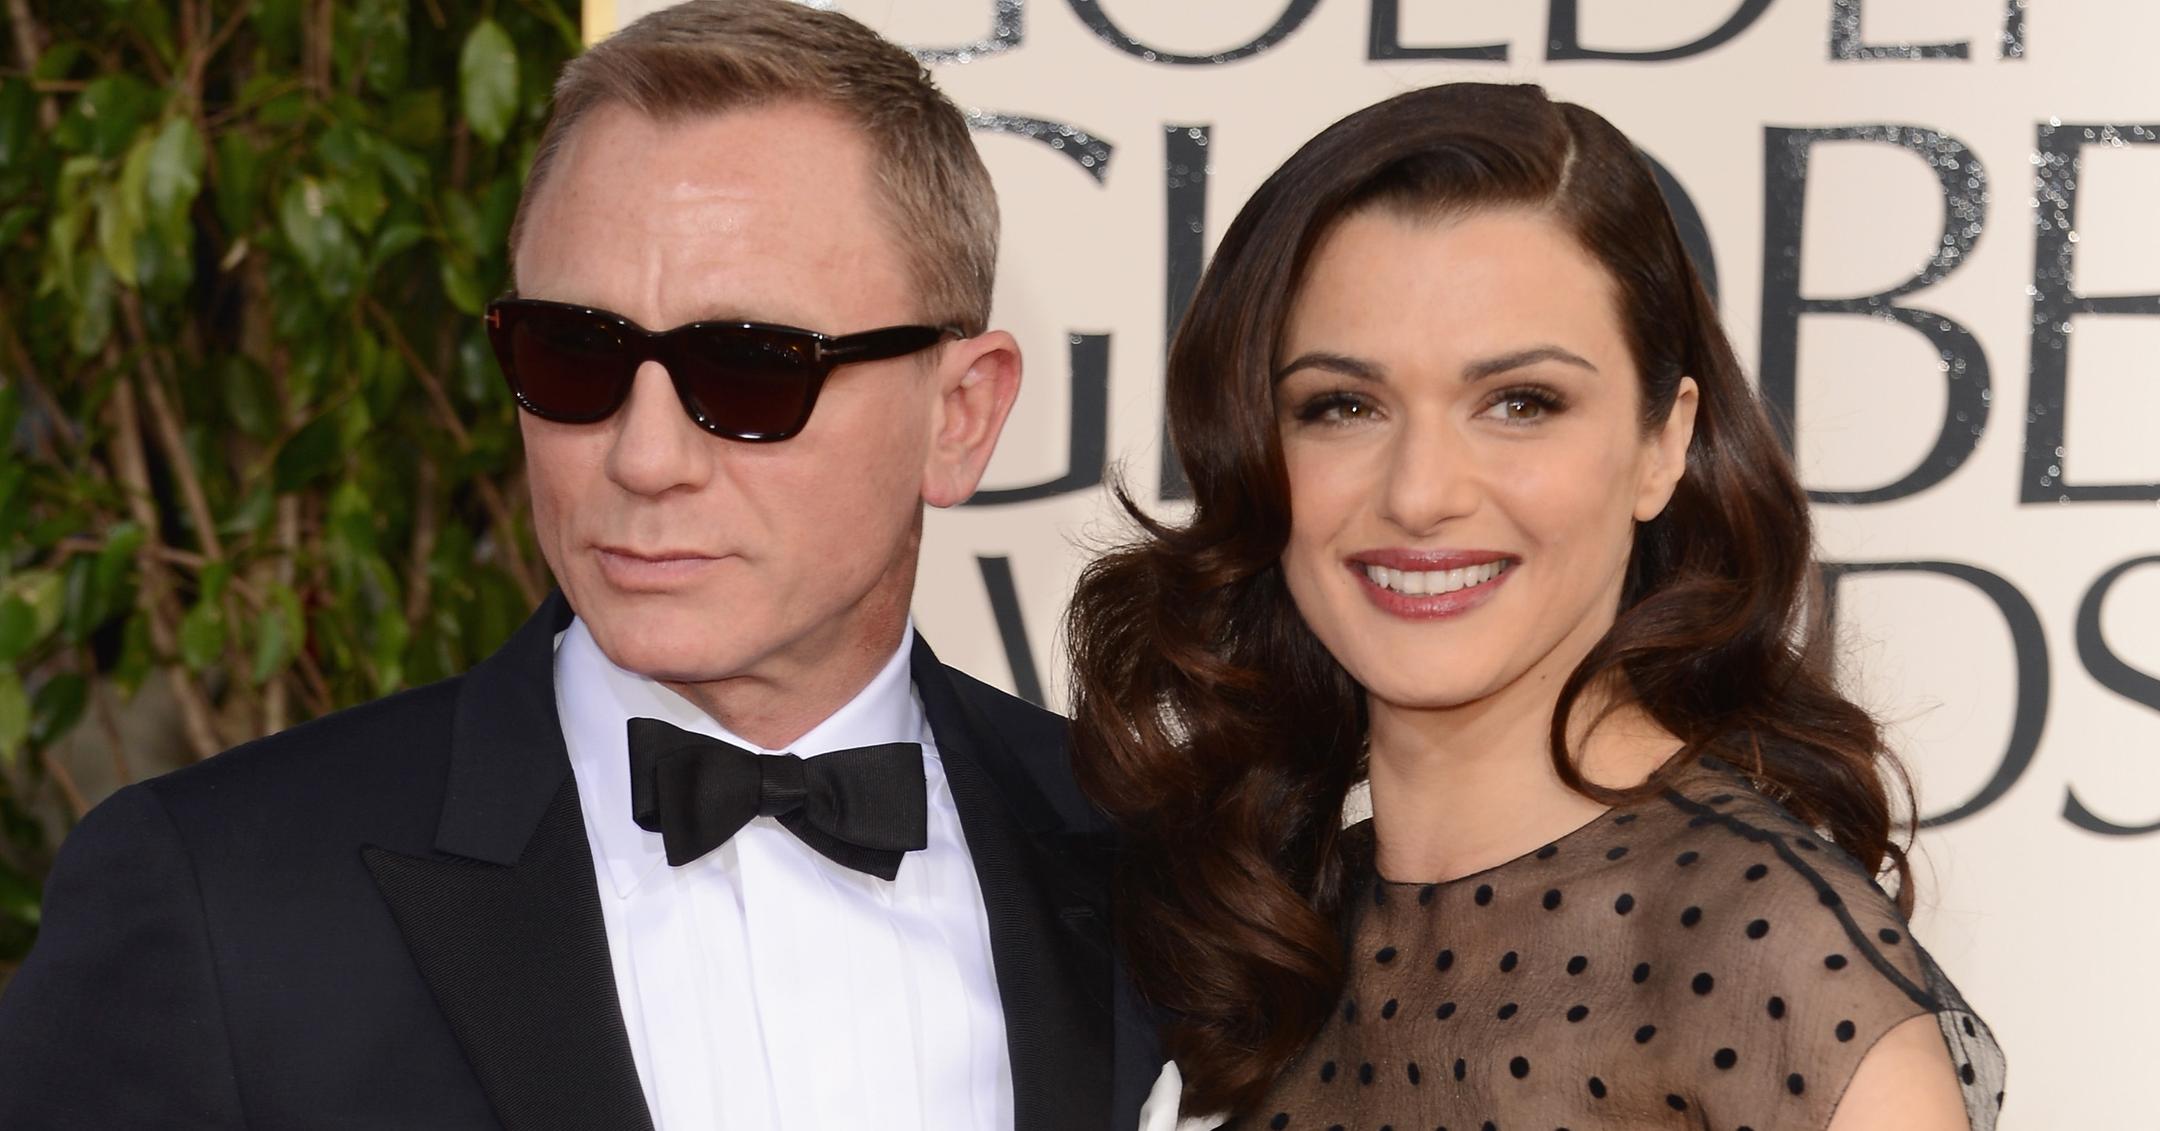 Is Daniel Craig Married? His Wife Is a Fellow Actor. Here's What We Know